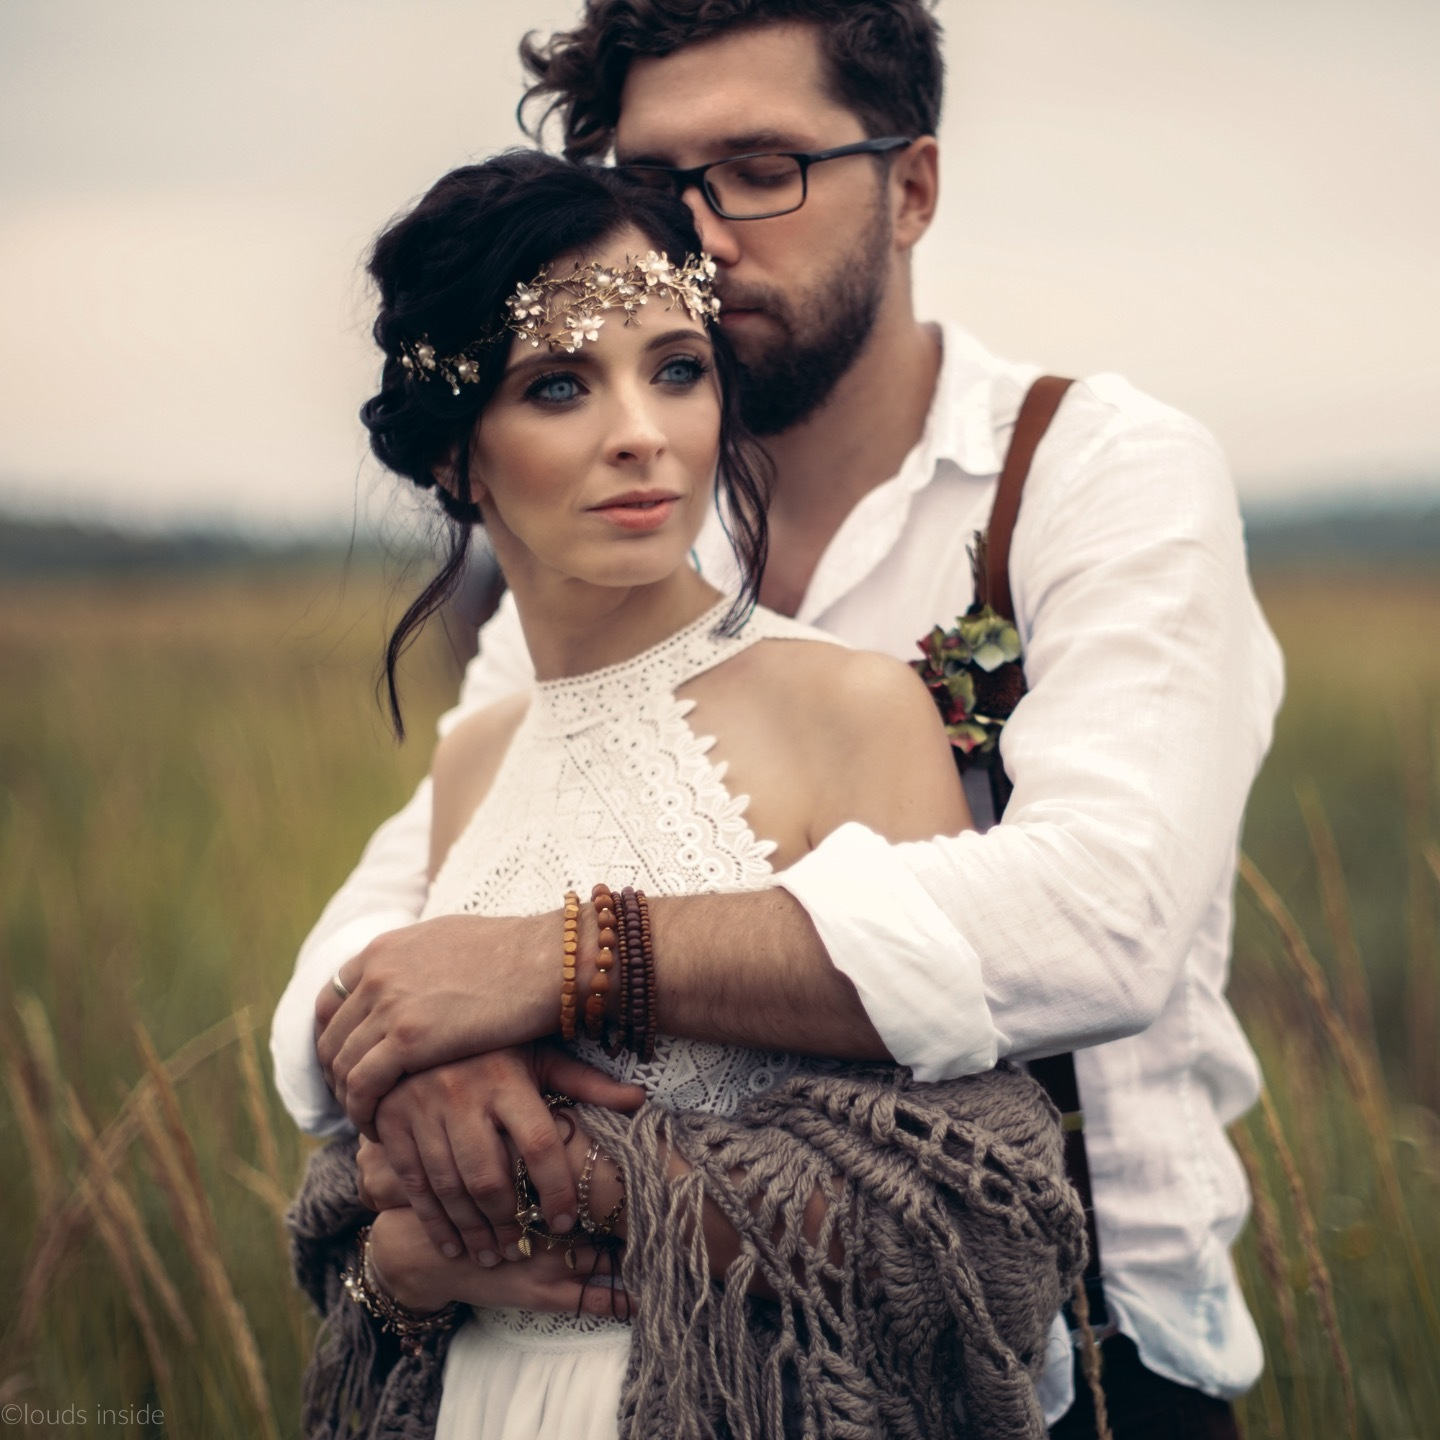 Boho love-story in autumn colors